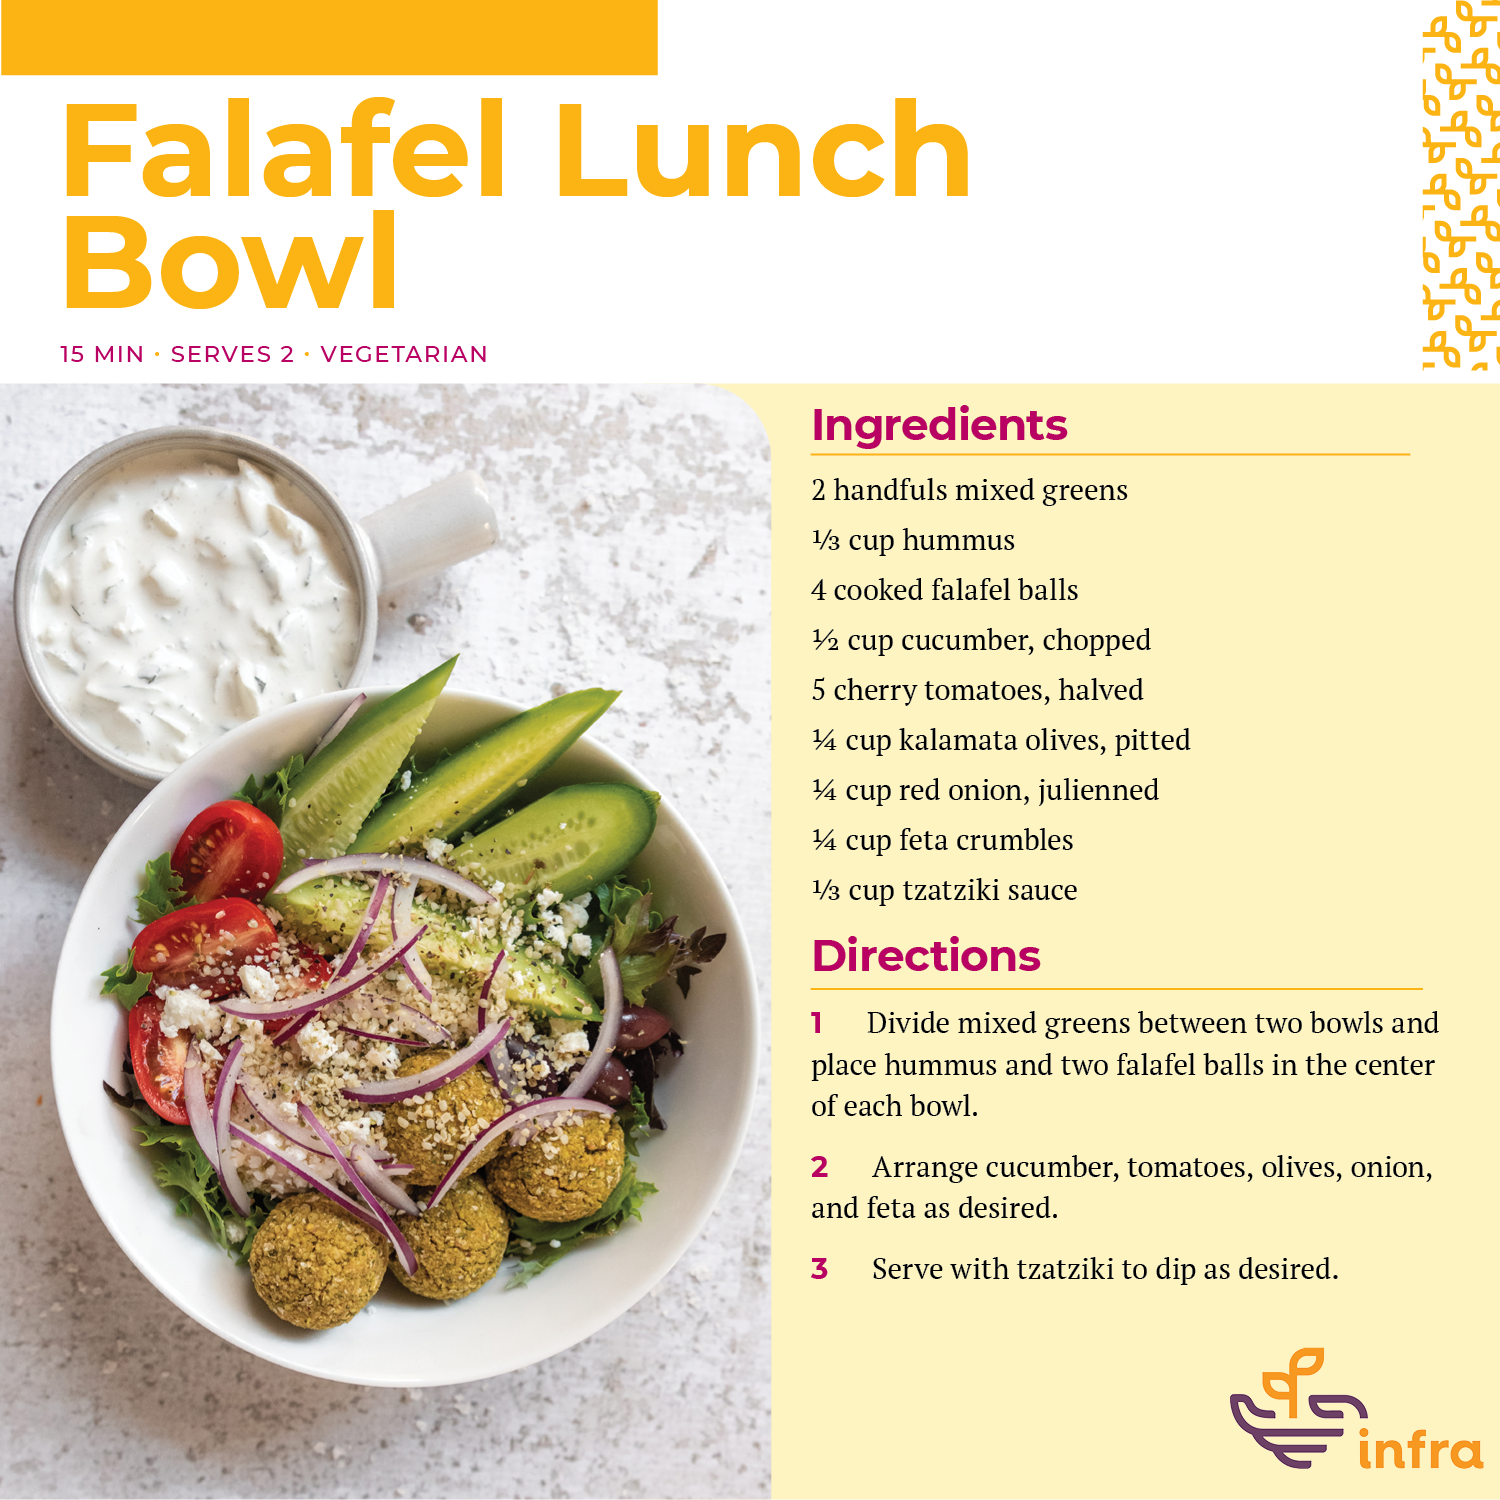 Falafel Lunch Bowl Image and Recipe.png